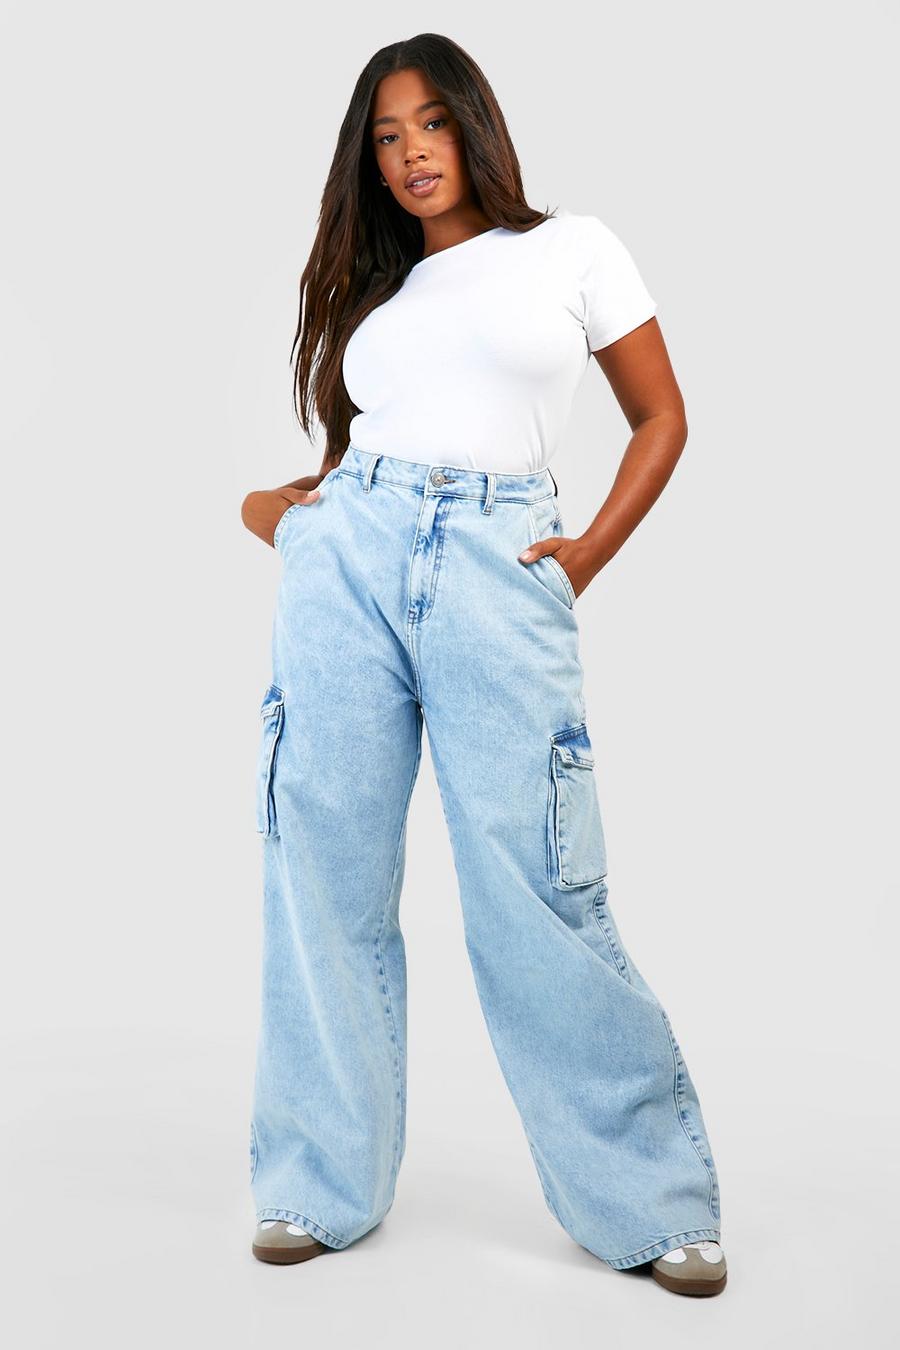 oversized baggy jeans for plus size women @kee.illena  Apple shape outfits,  Plus size cargo pants, Cargo pants outfit plus size